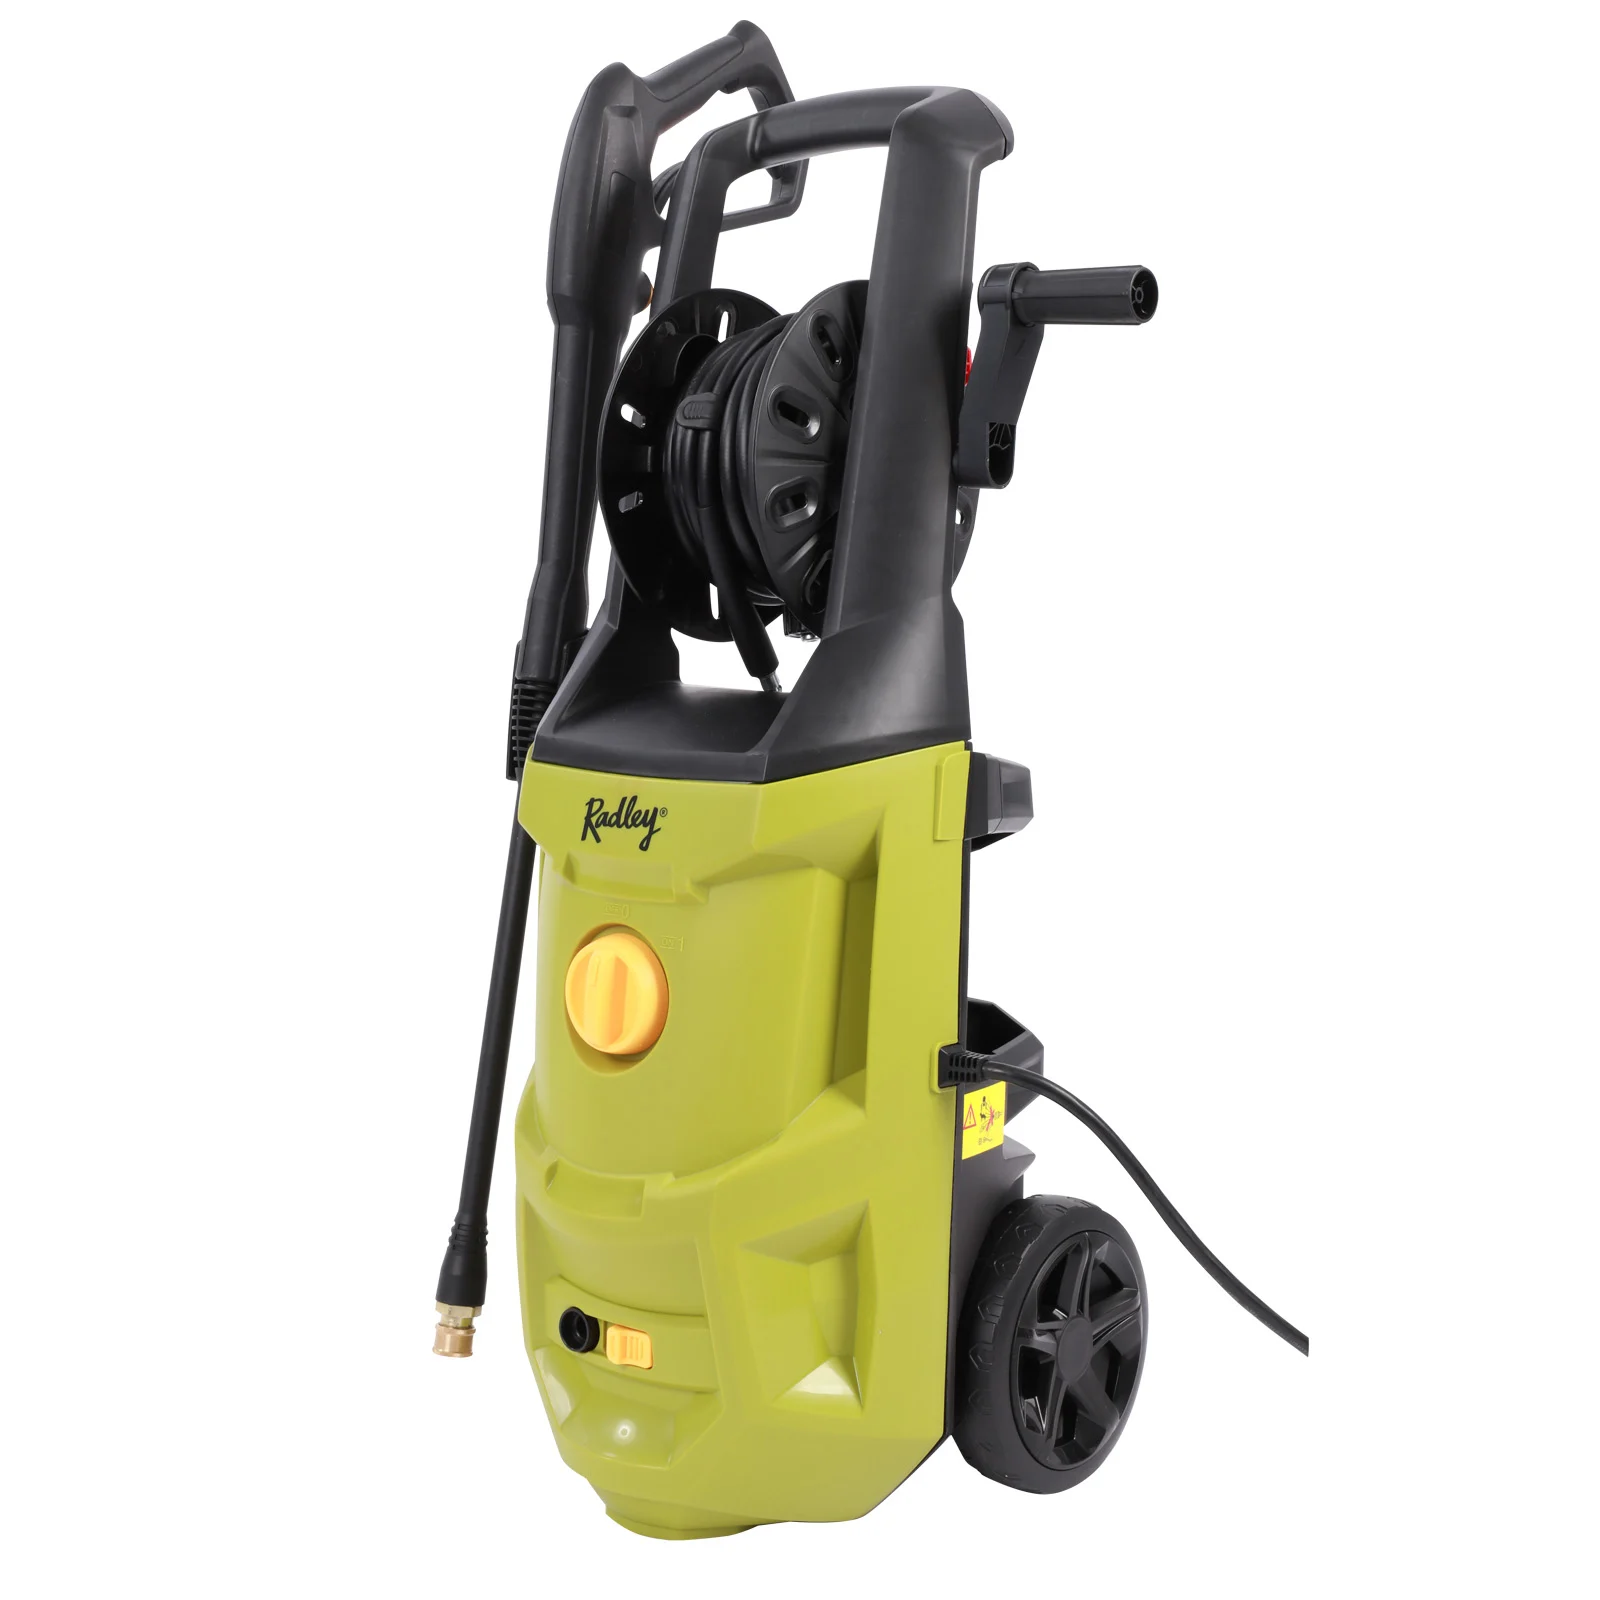 An electric pressure washer